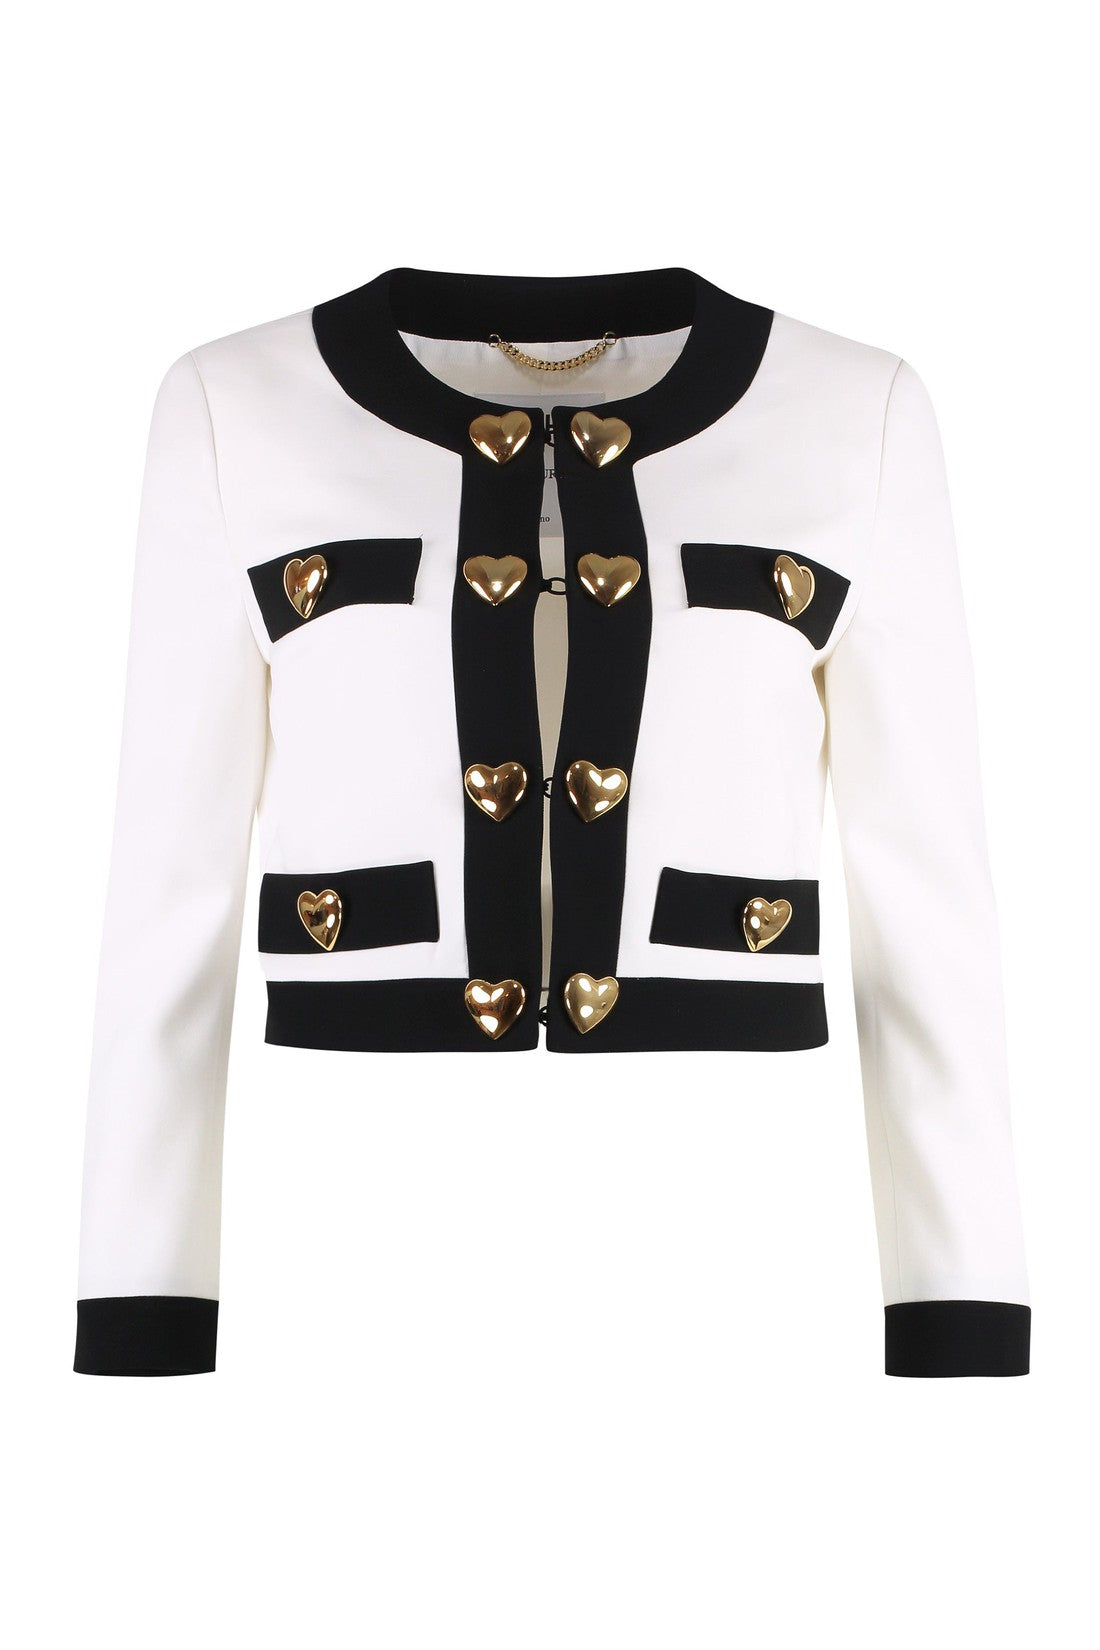 Moschino-OUTLET-SALE-Crepe jacket-ARCHIVIST